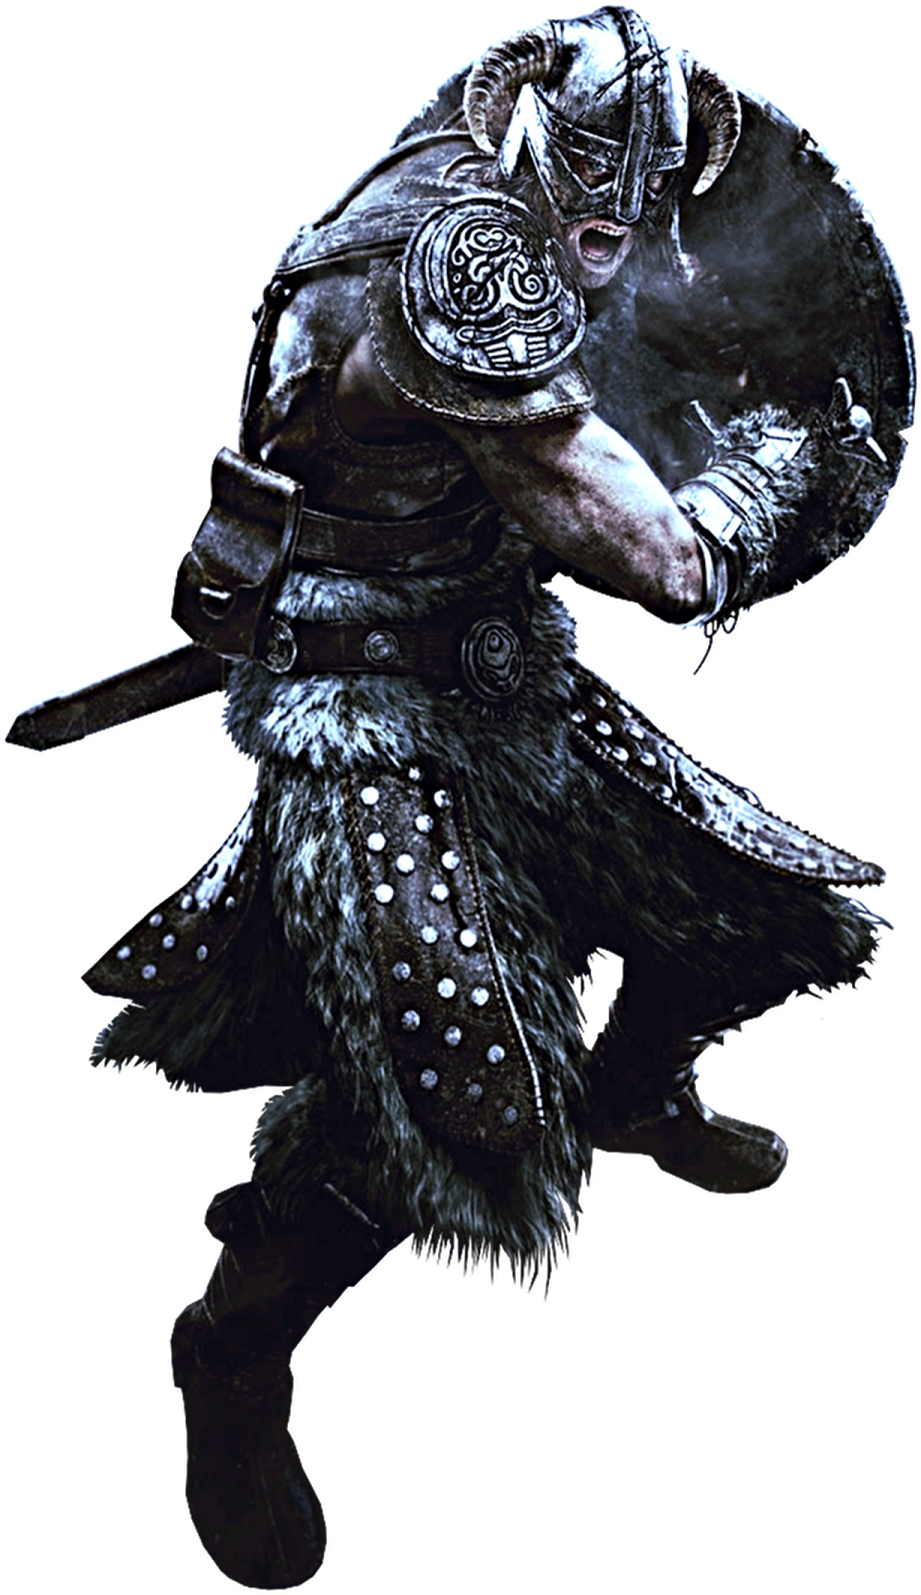 Karstaag defeated. You guys think Ebony Warrior is going to be a tougher  opponent? : r/skyrim